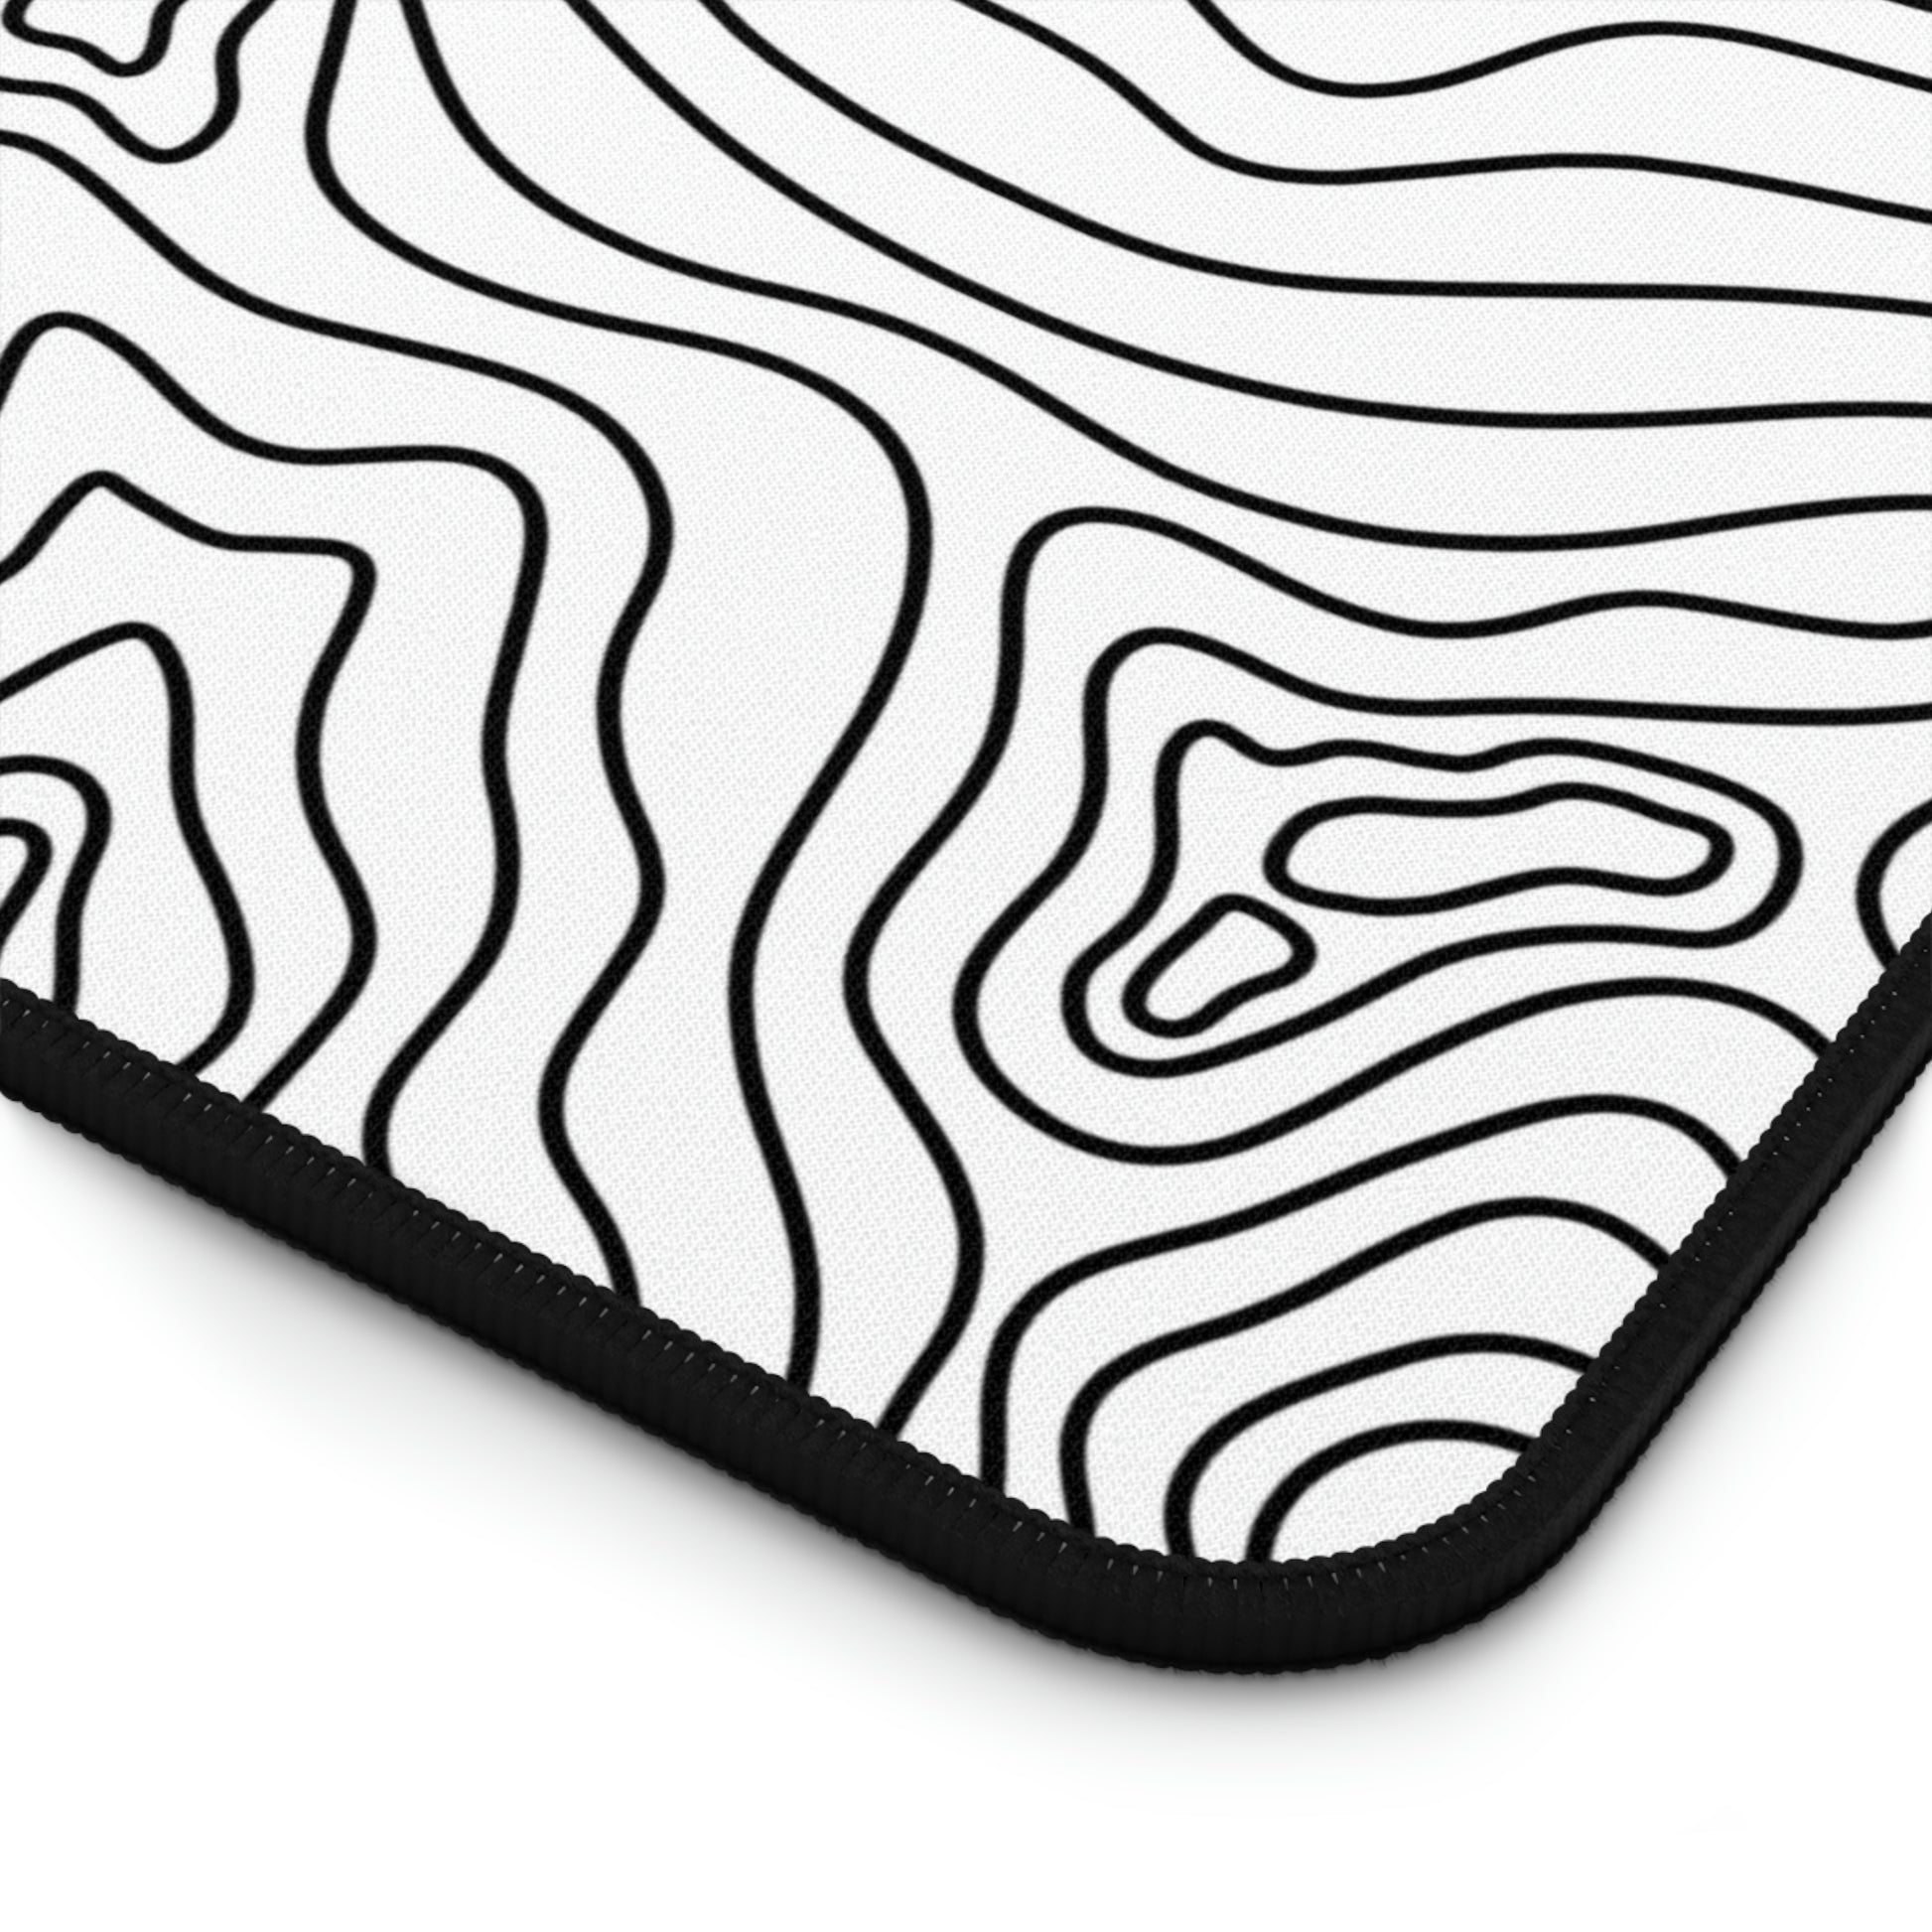 The bottom right corner of a 12" x 22" white desk mat with black topographic lines.